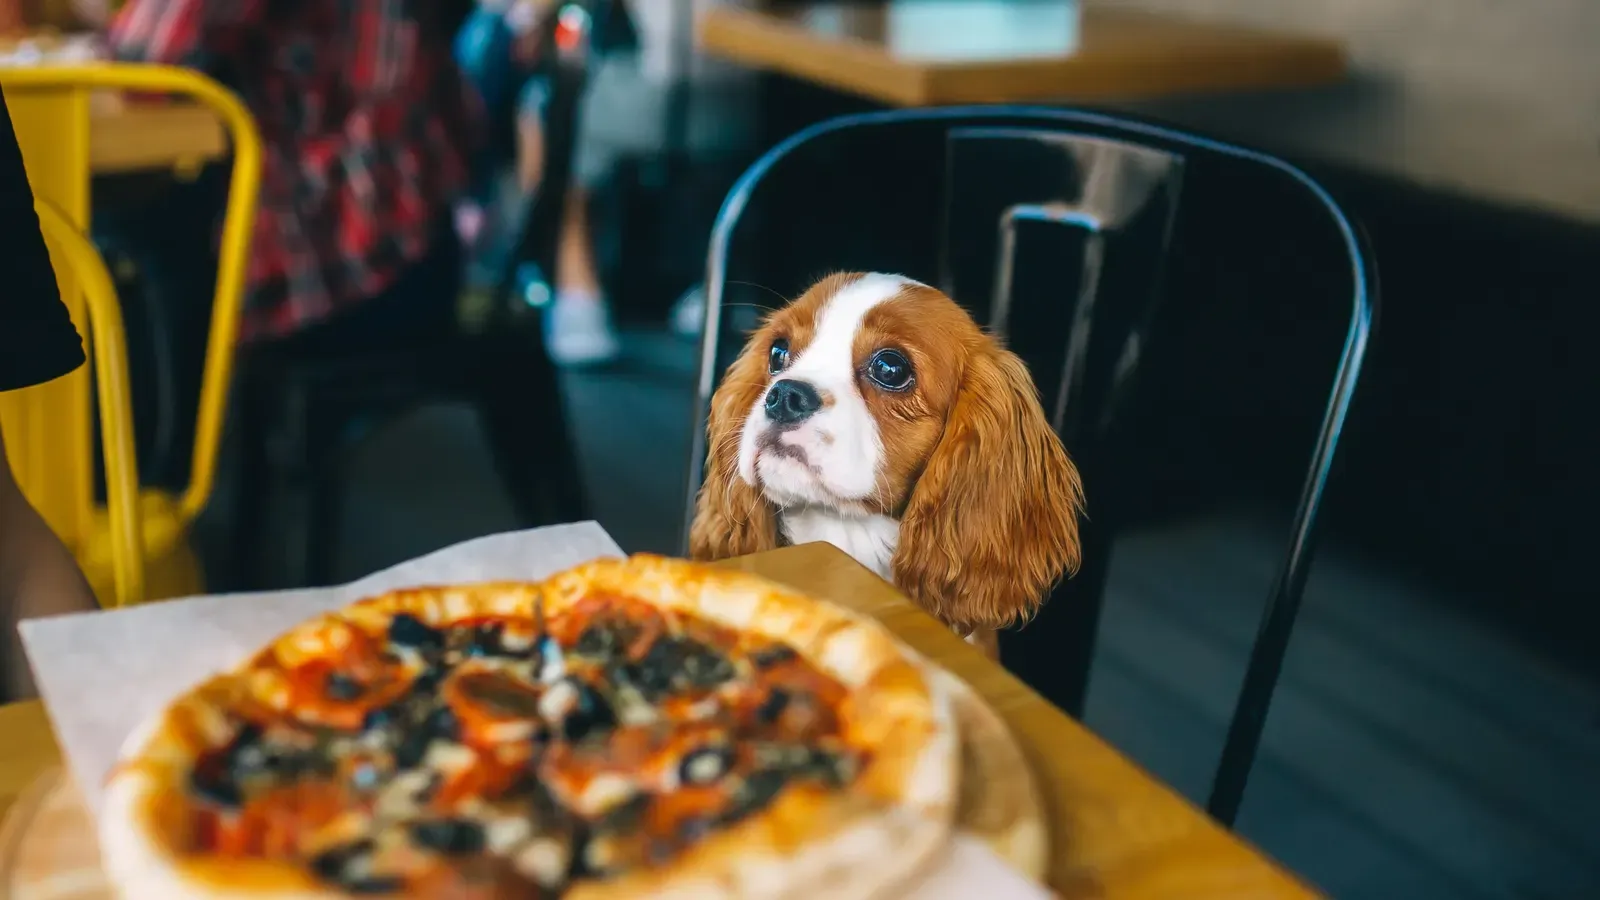 Pet-Friendly Restaurants and Cafes in Orlando